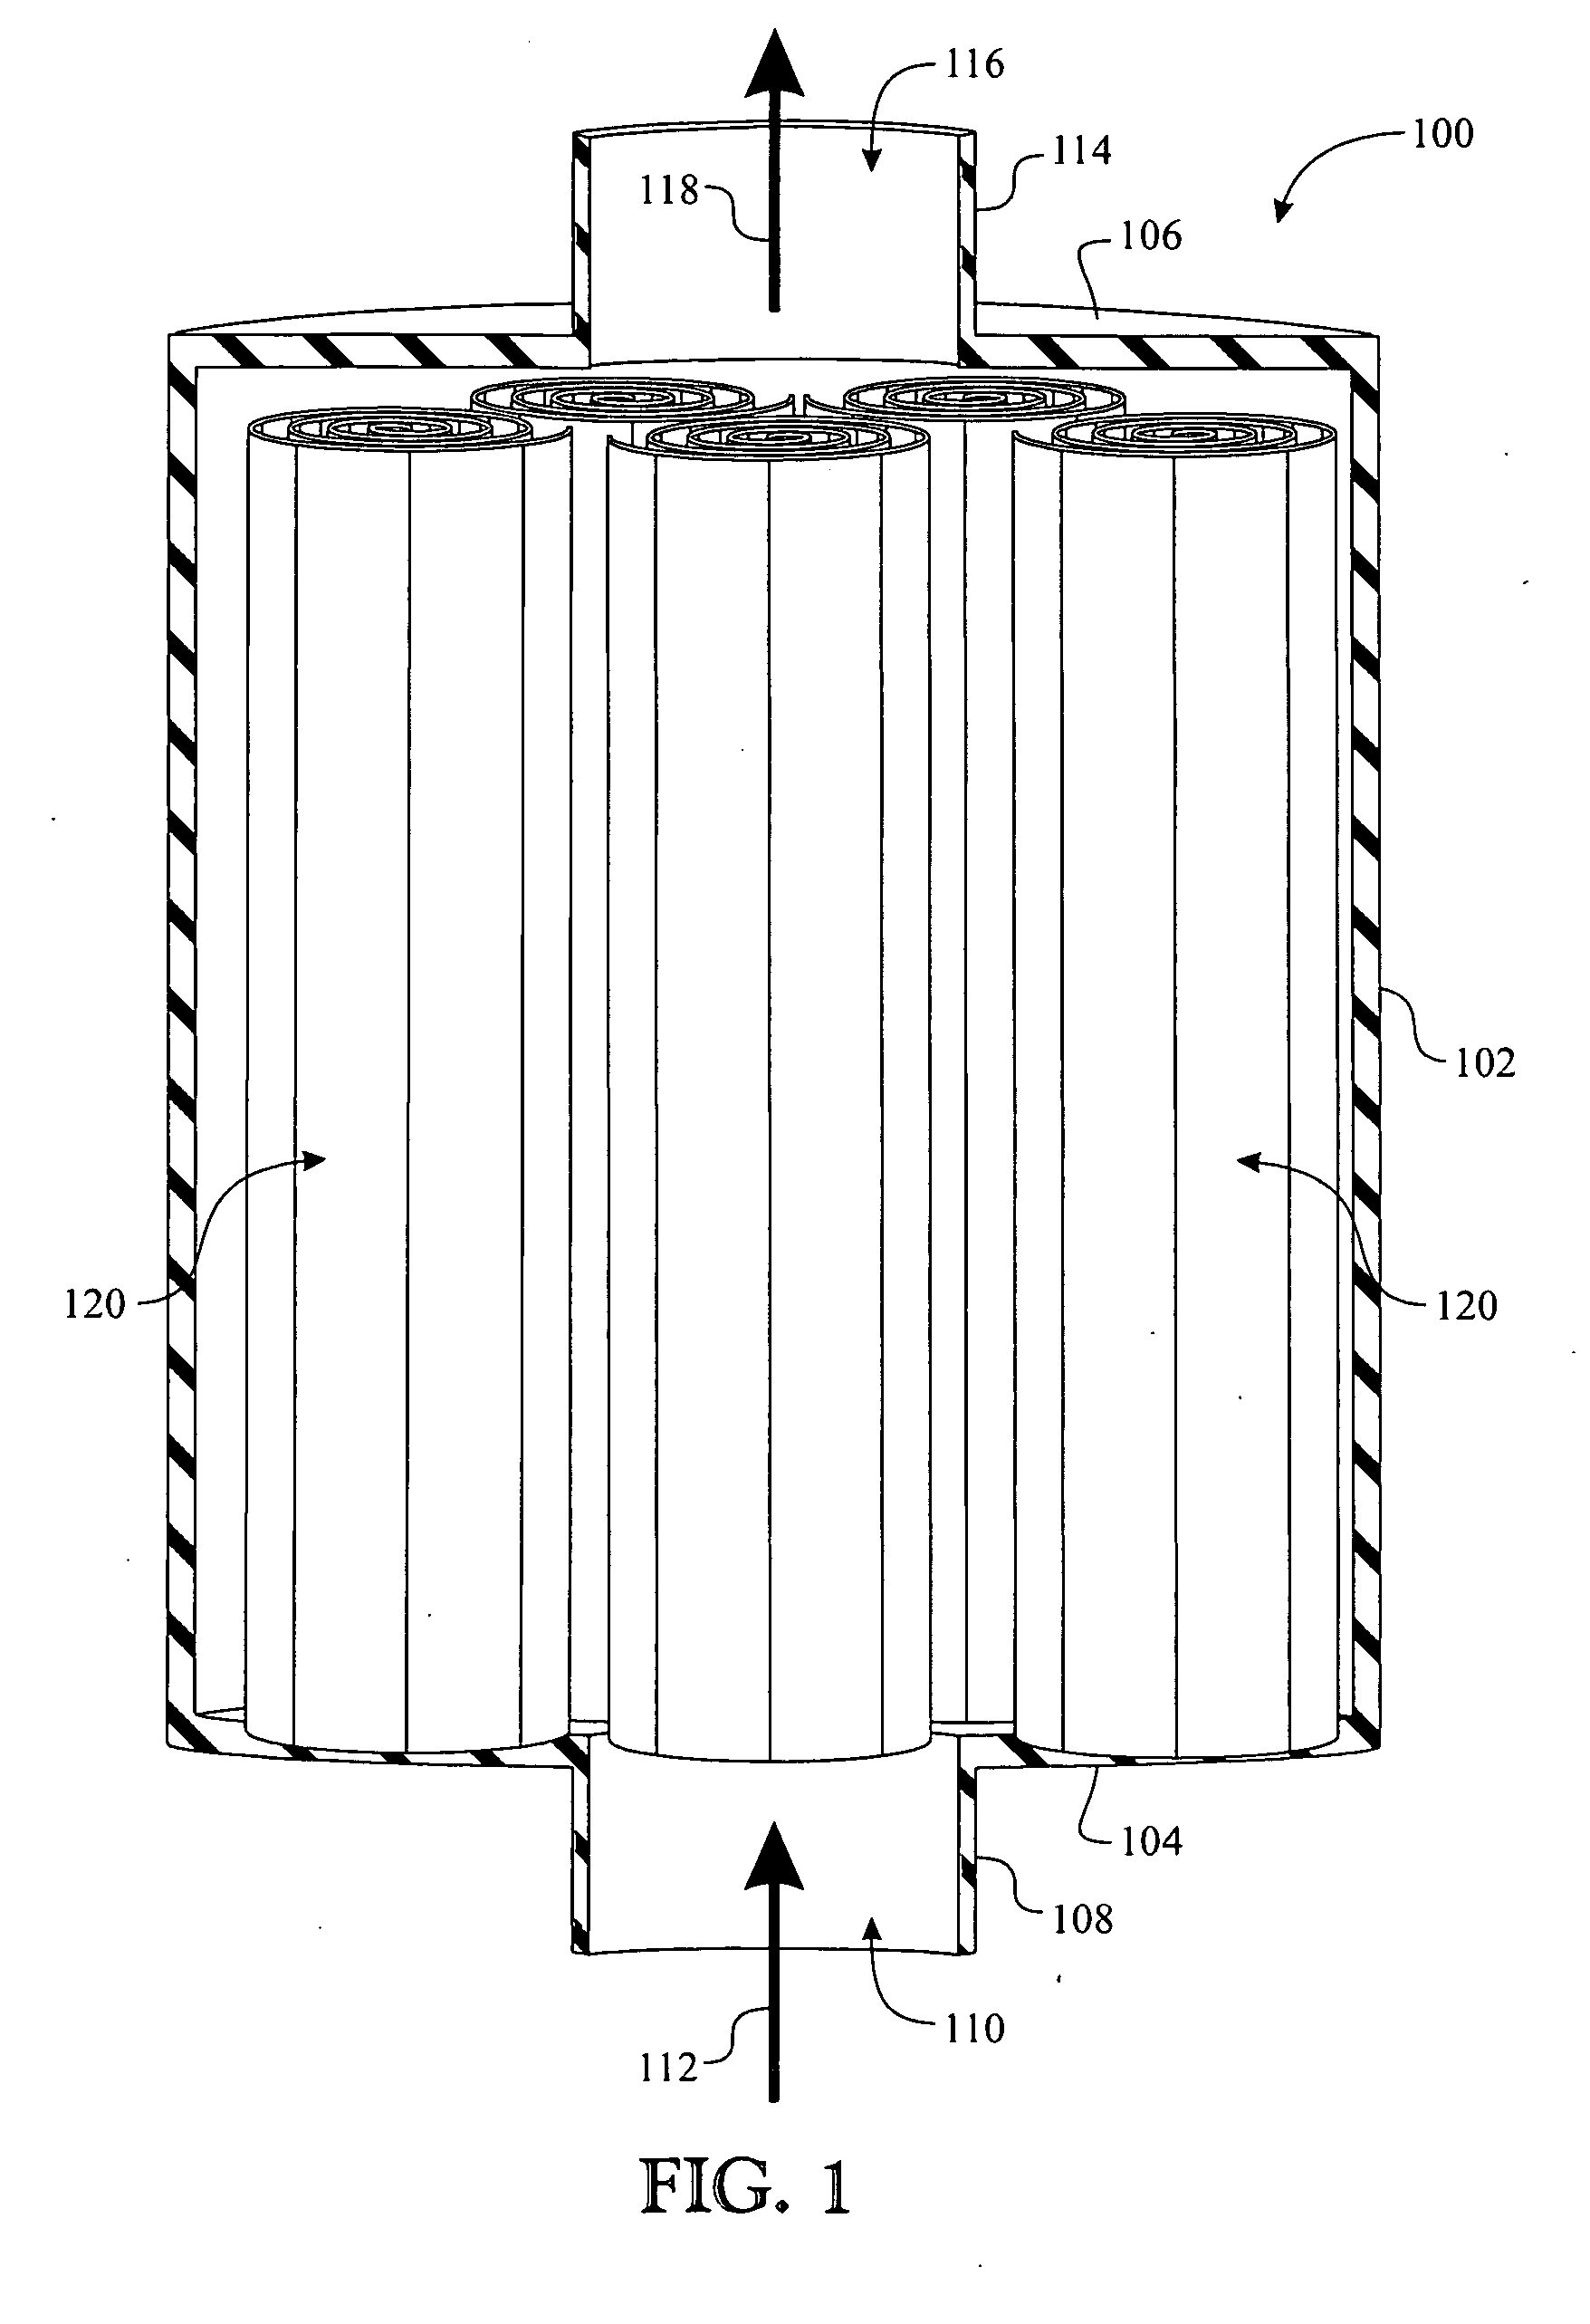 Air and contaminant isolation and removal apparatus and method